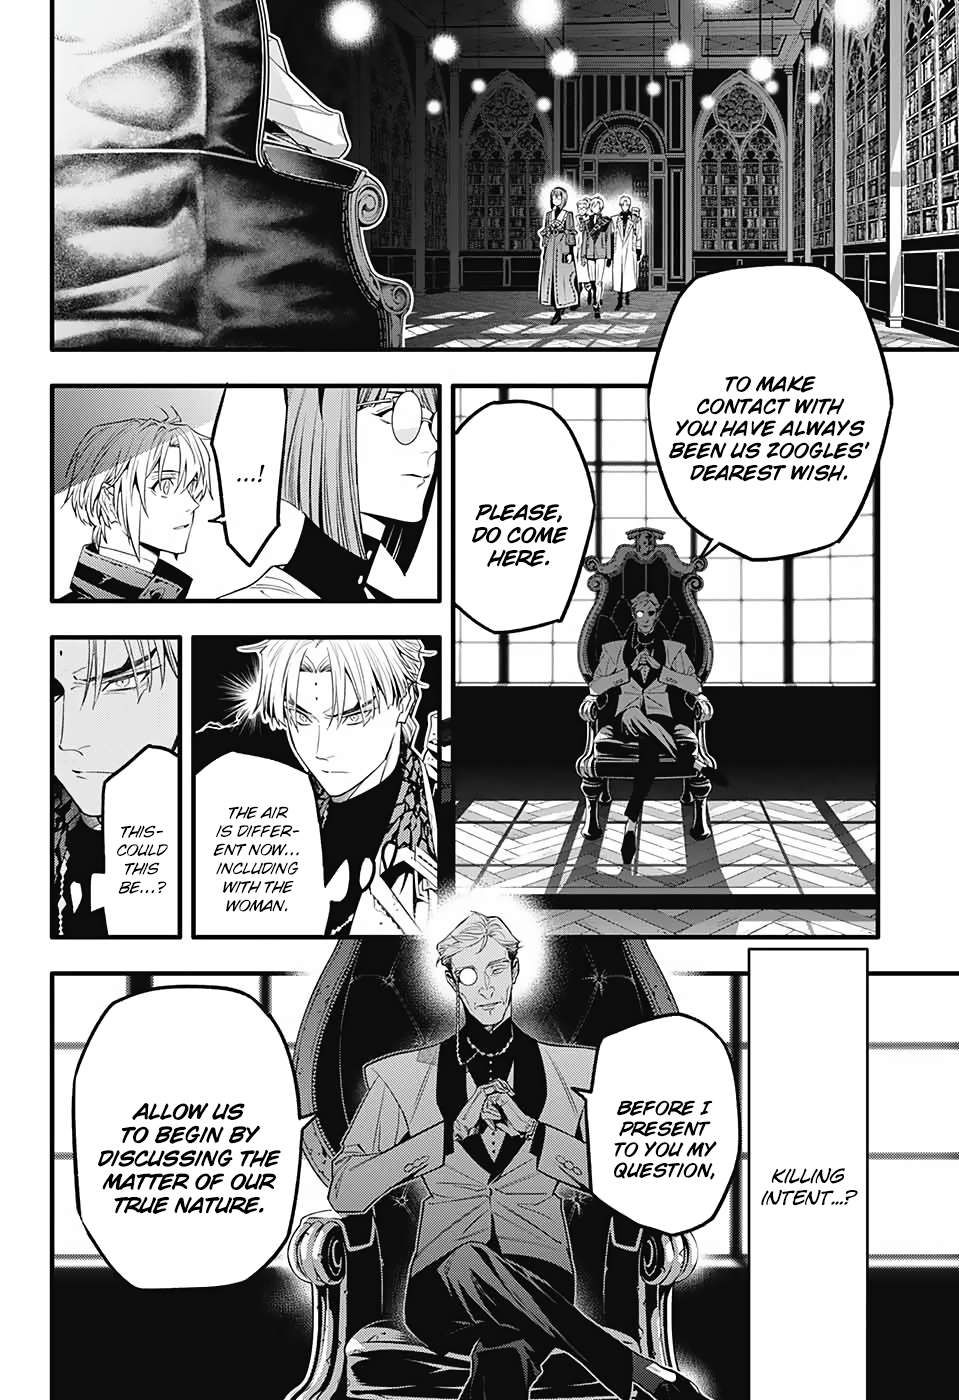 D.Gray-man chapter 251 page 16